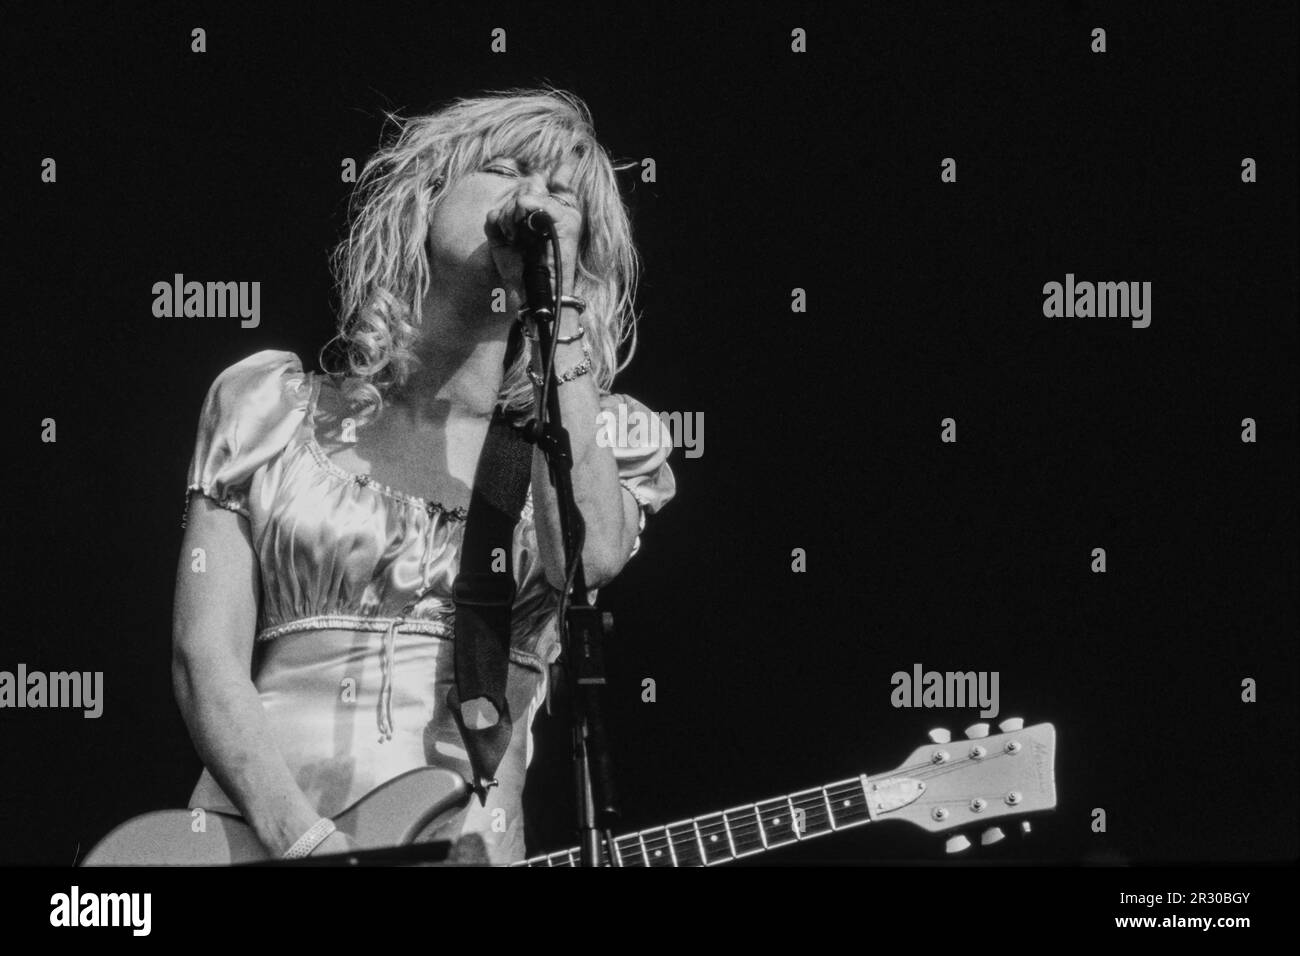 Reading, UK, 26 Aug., 1994: Hole made their Reading Festival debut on Friday, 26 August, 1994.It was front-woman Courtney Love’s first public appearance since the death of husband Curt Kobain five months previously and just two months after the death of Hole’s bassist, Kristen Pfaff, from an overdose. Founded as the National Jazz Festival in 1961, the festival moved to its permanent home at Little John's Farm in Reading in 1971 and is held over the UK’s August bank holiday weekend. Stock Photo